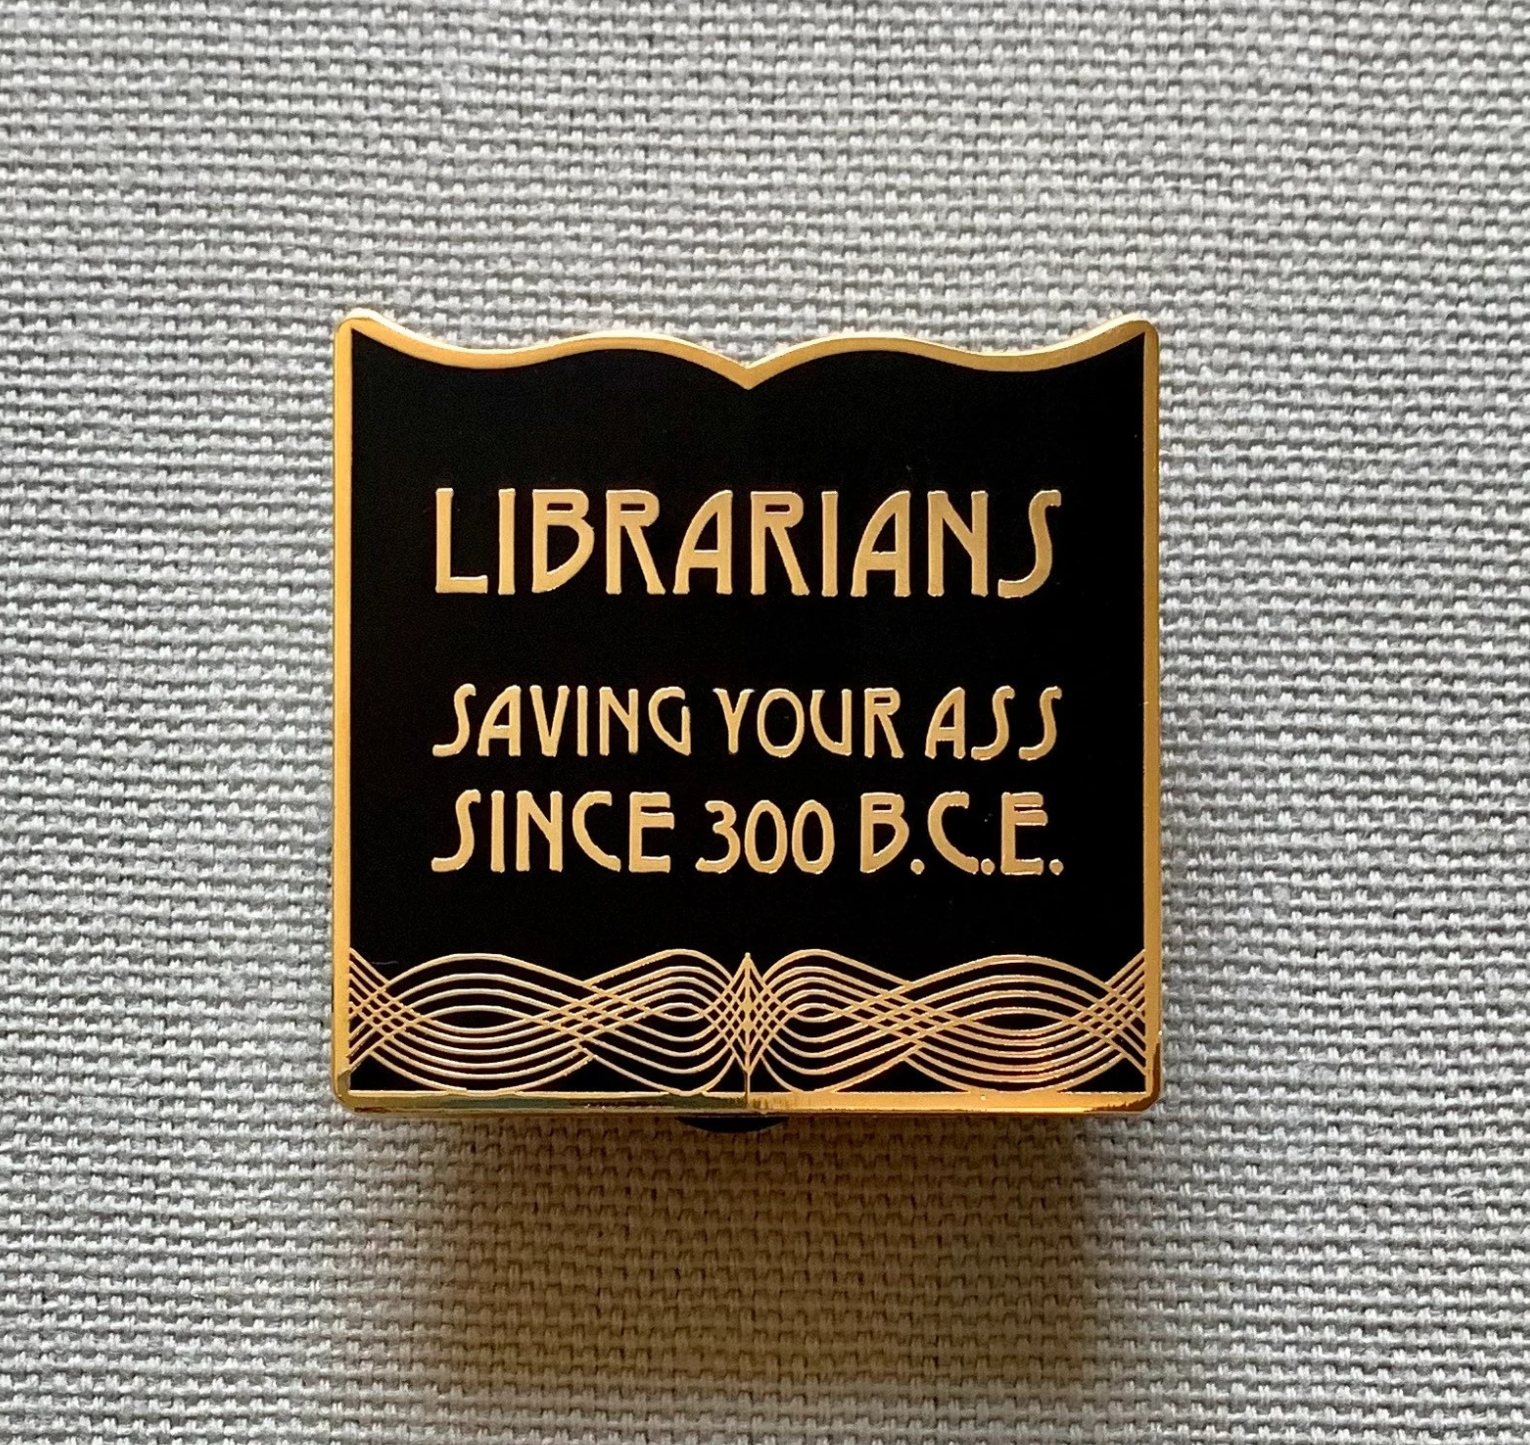 Librarians "Saving Your Ass since 300 BCE" Black and Gold Enamel Pin